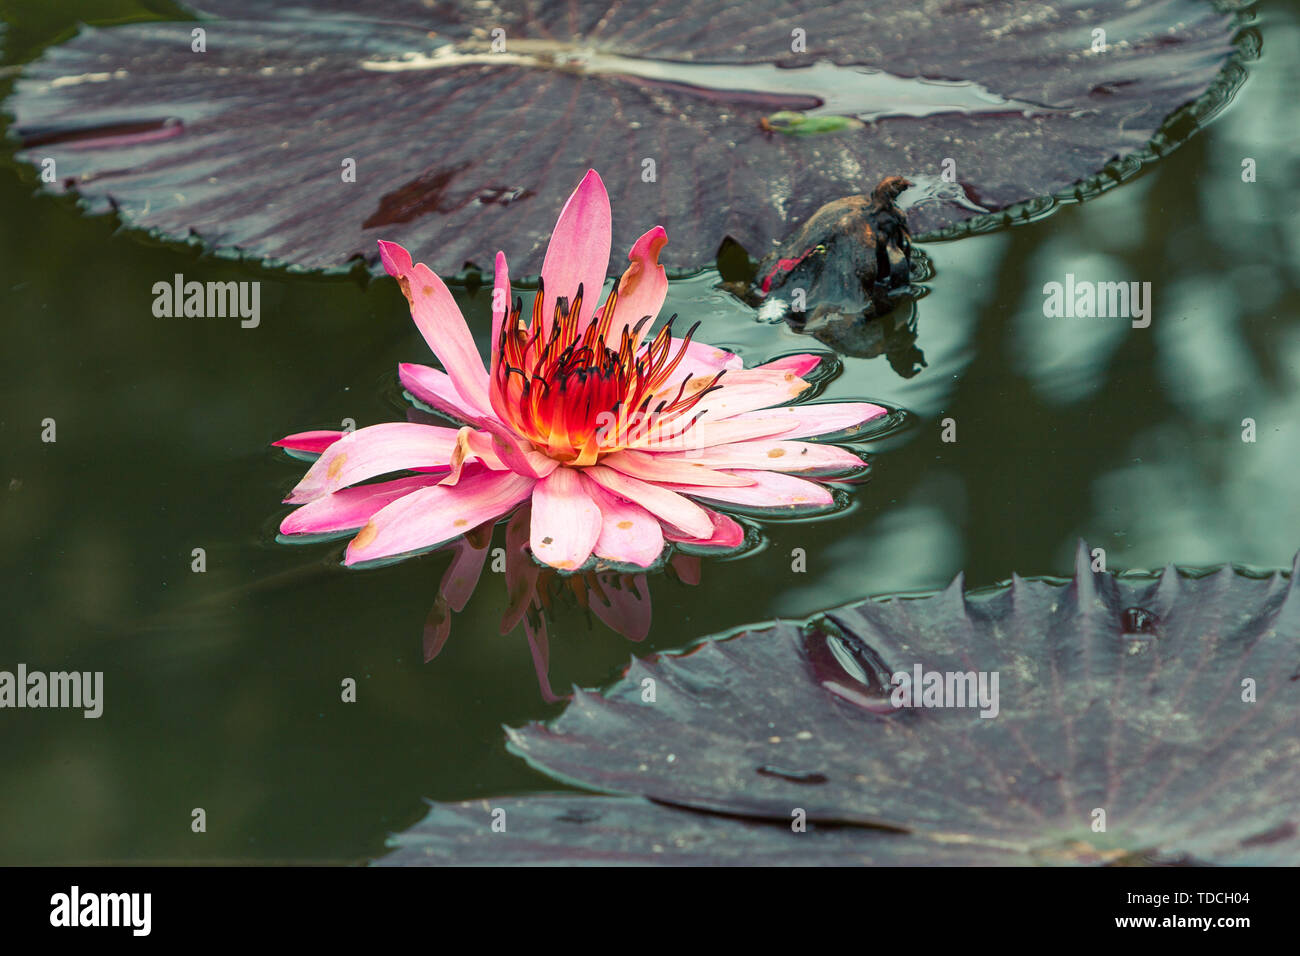 Pink water Lilly flower fully bloomed in their natural environment. Stock Photo